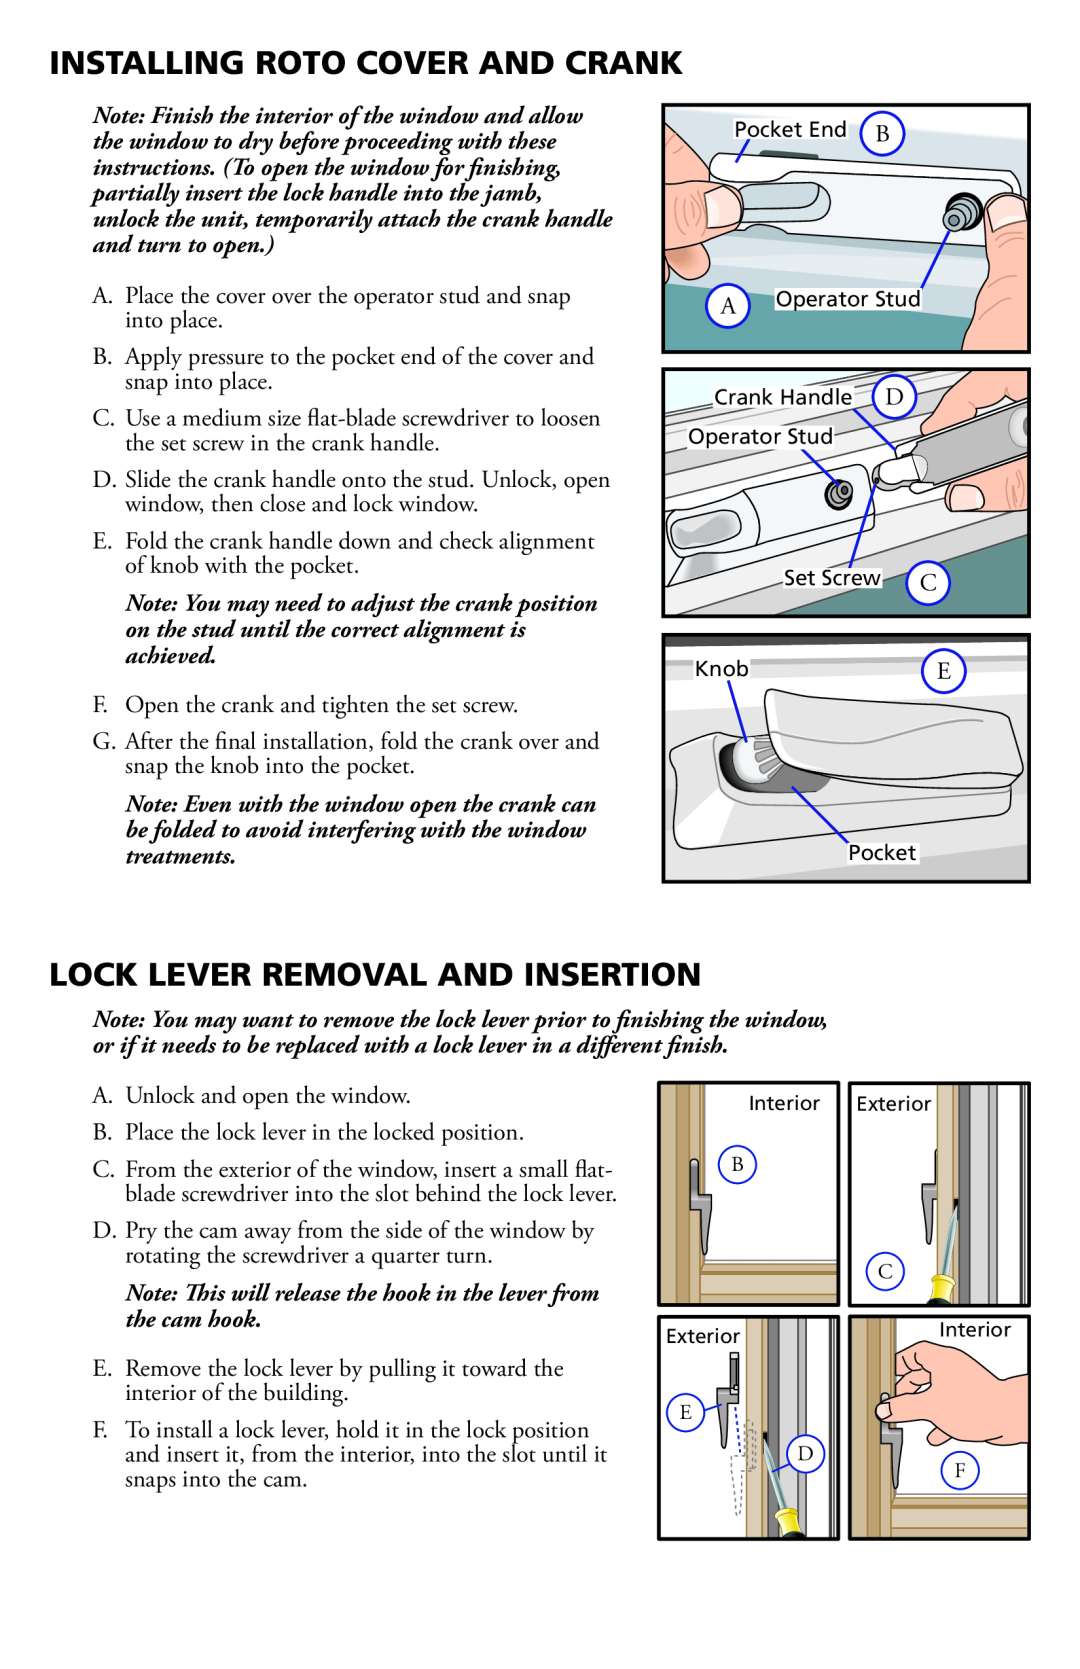 Pella 812W0100 installation instructions Installing Roto Cover And Crank, Lock Lever Removal And Insertion 